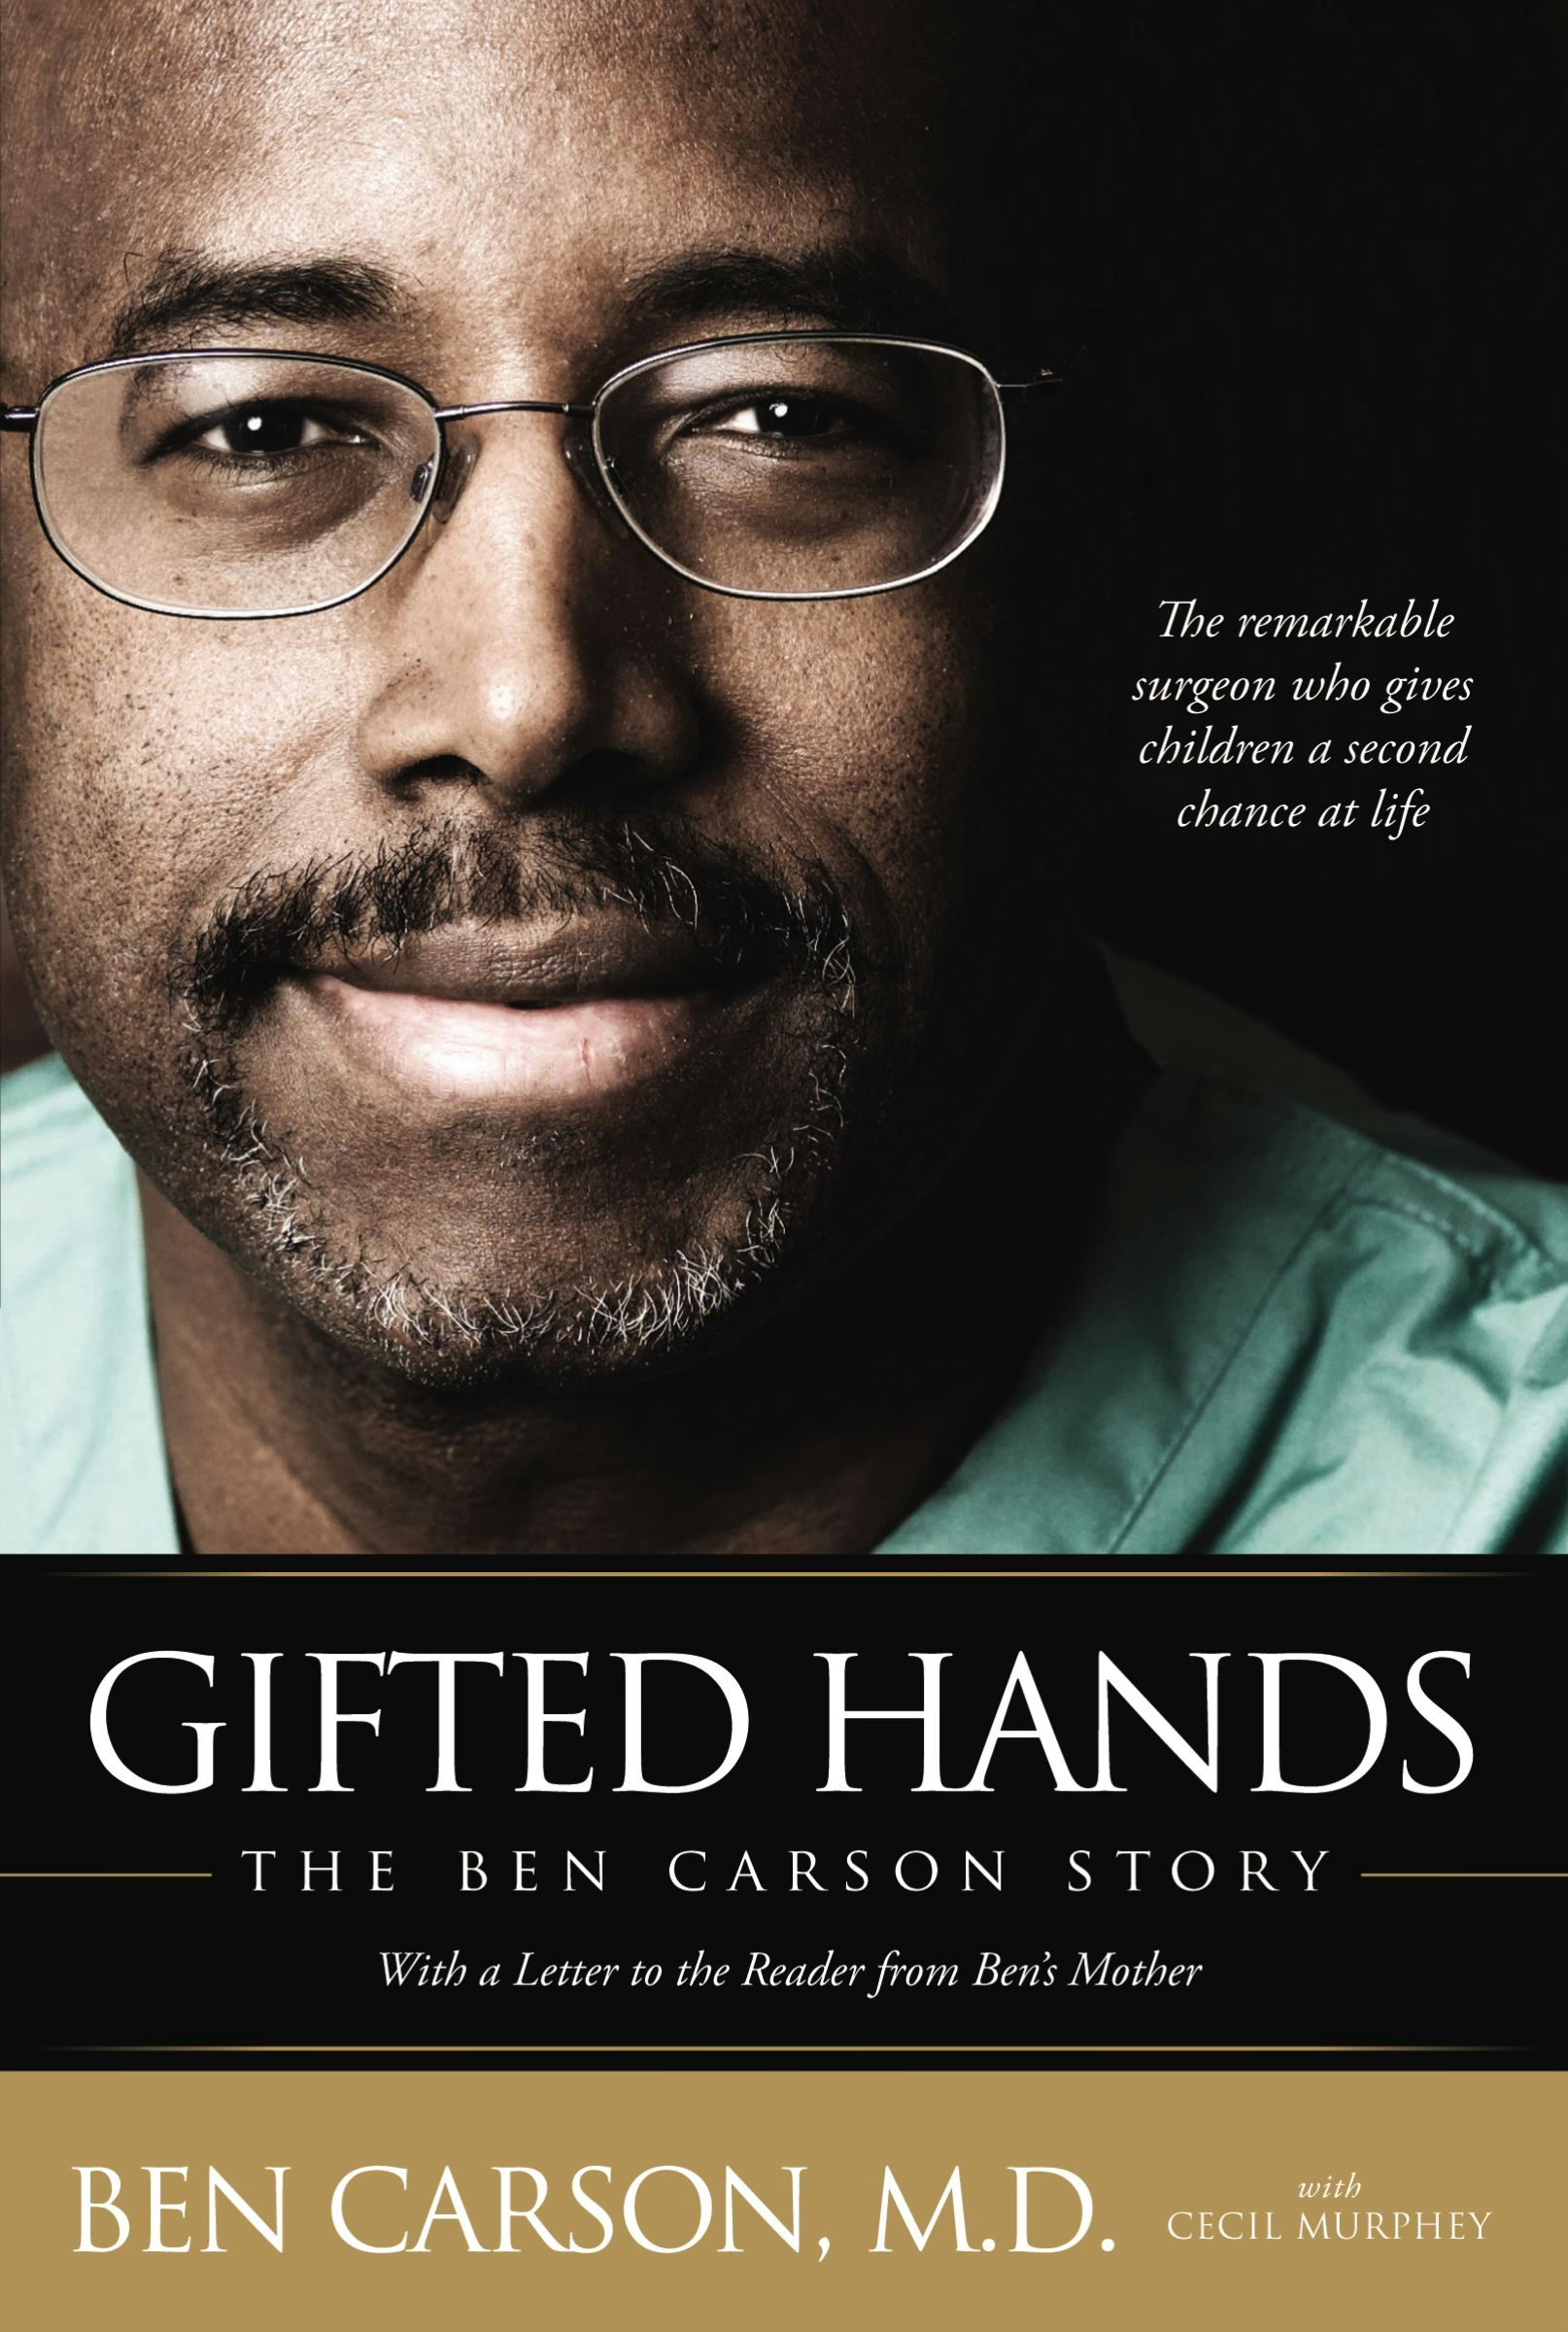 gifted hands book pdf download